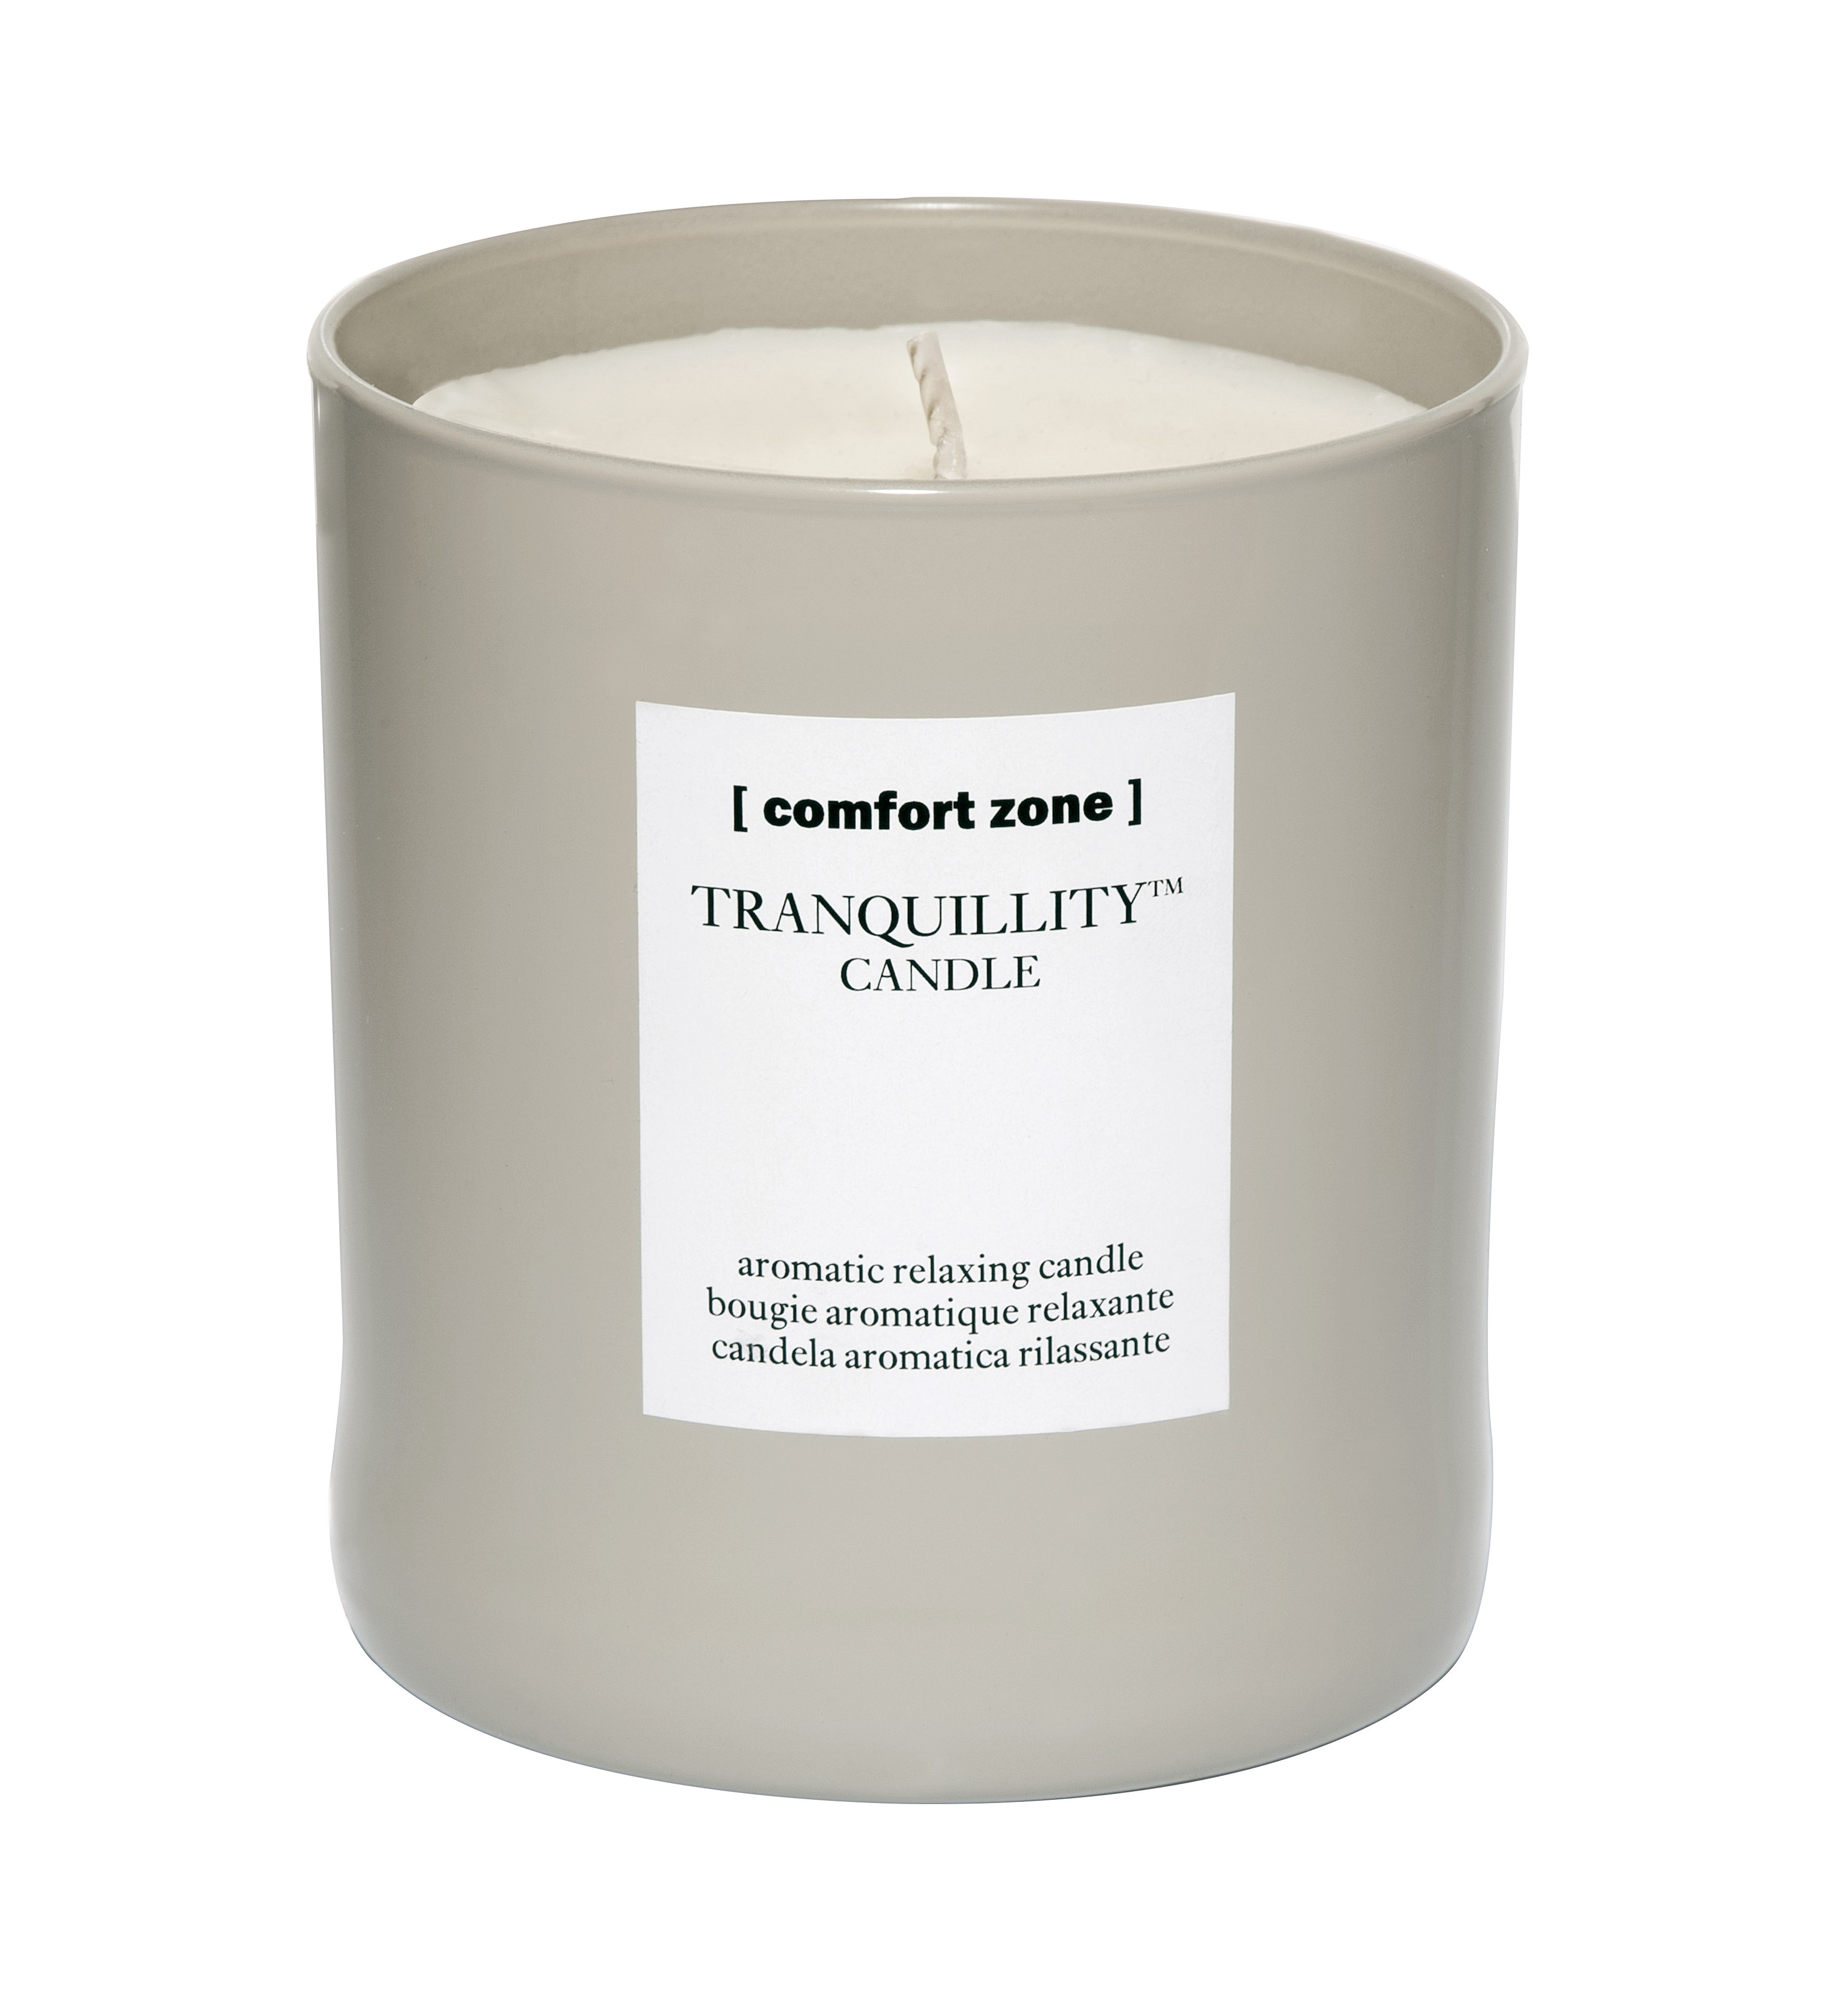 COMFORT ZONE - Tranquillity Candle 280gr - Parfuma